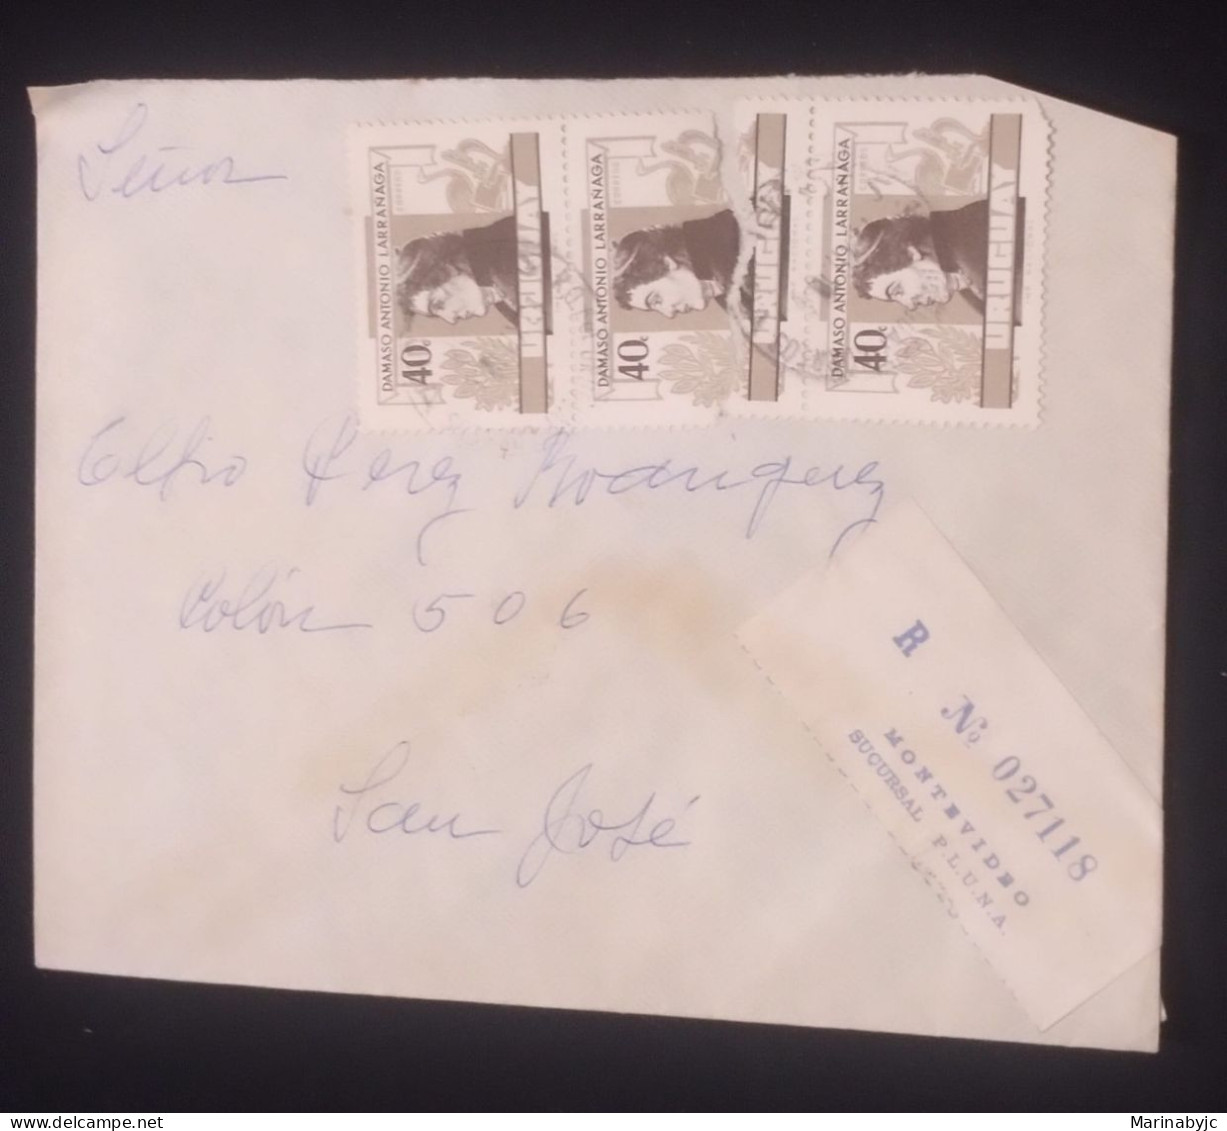 C) URUGUAY, INTERNAL MAIL WITH MULTIPLE STAMPS - Uruguay